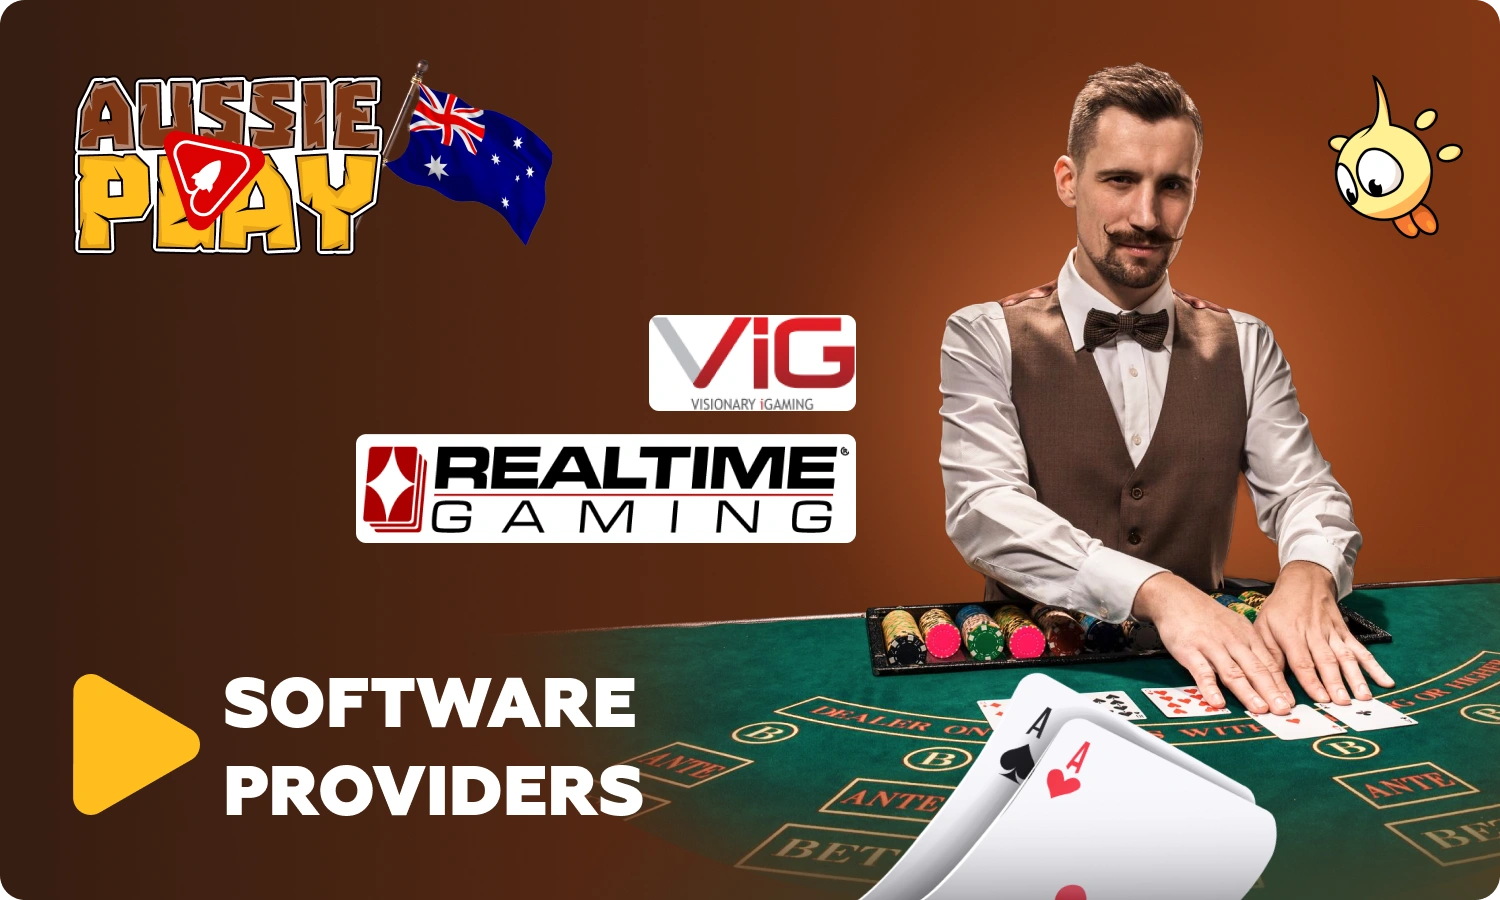 Aussie play Casino Australia has partnered with two software providers - RealTtime Gaming and Visionary iGaming